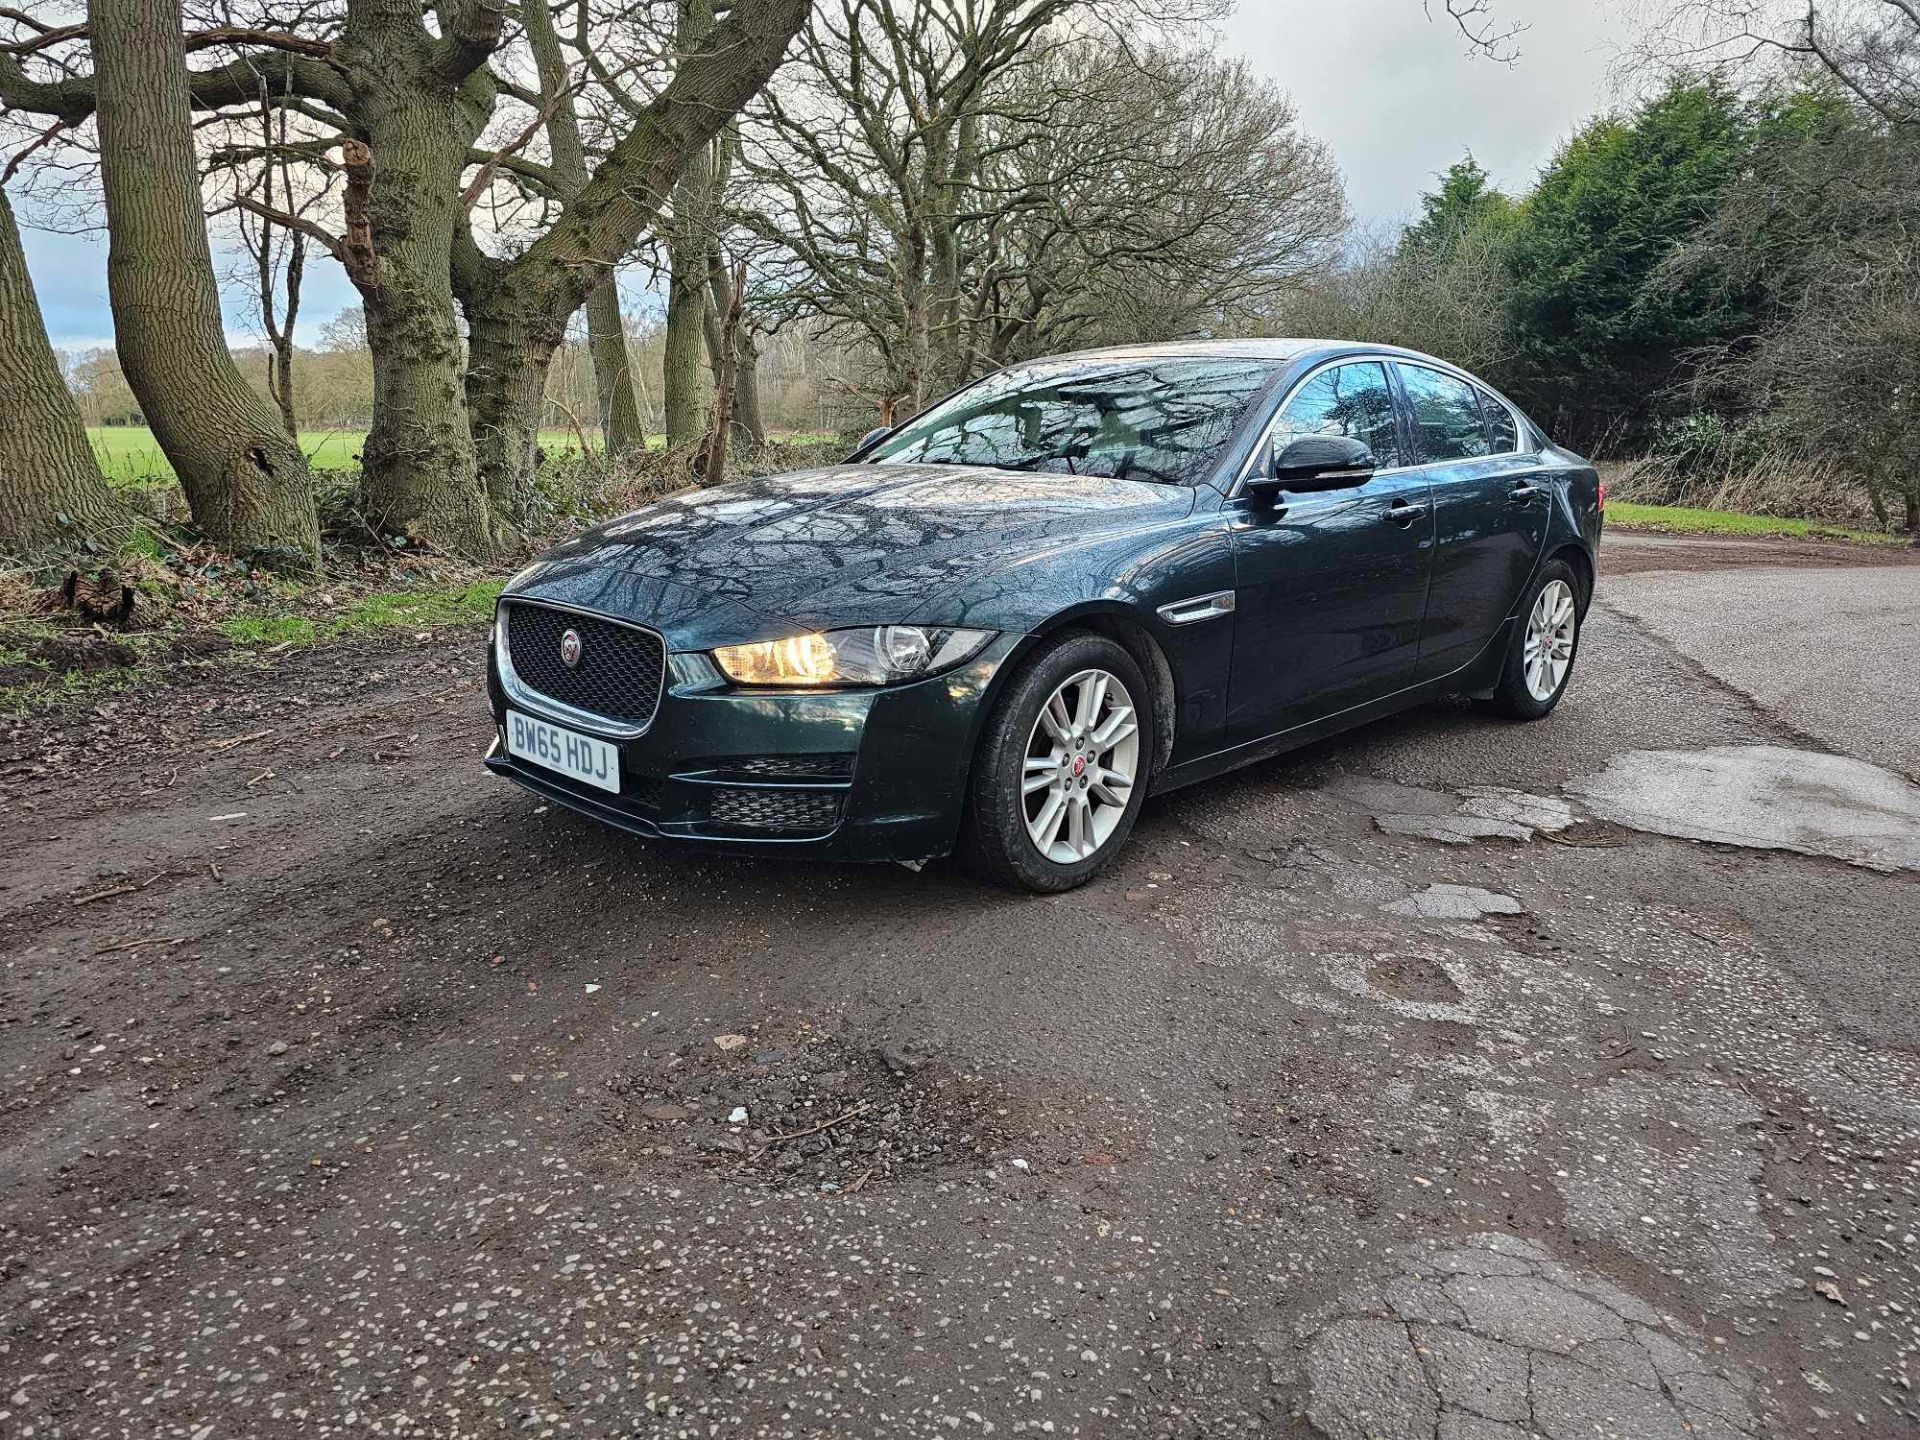 2015 65 JAGUAR XE SALOON - STARTS AND DRIVES BUT ENGINE IS NOISY - ALLOY WHEELS - 5 SERVICES.